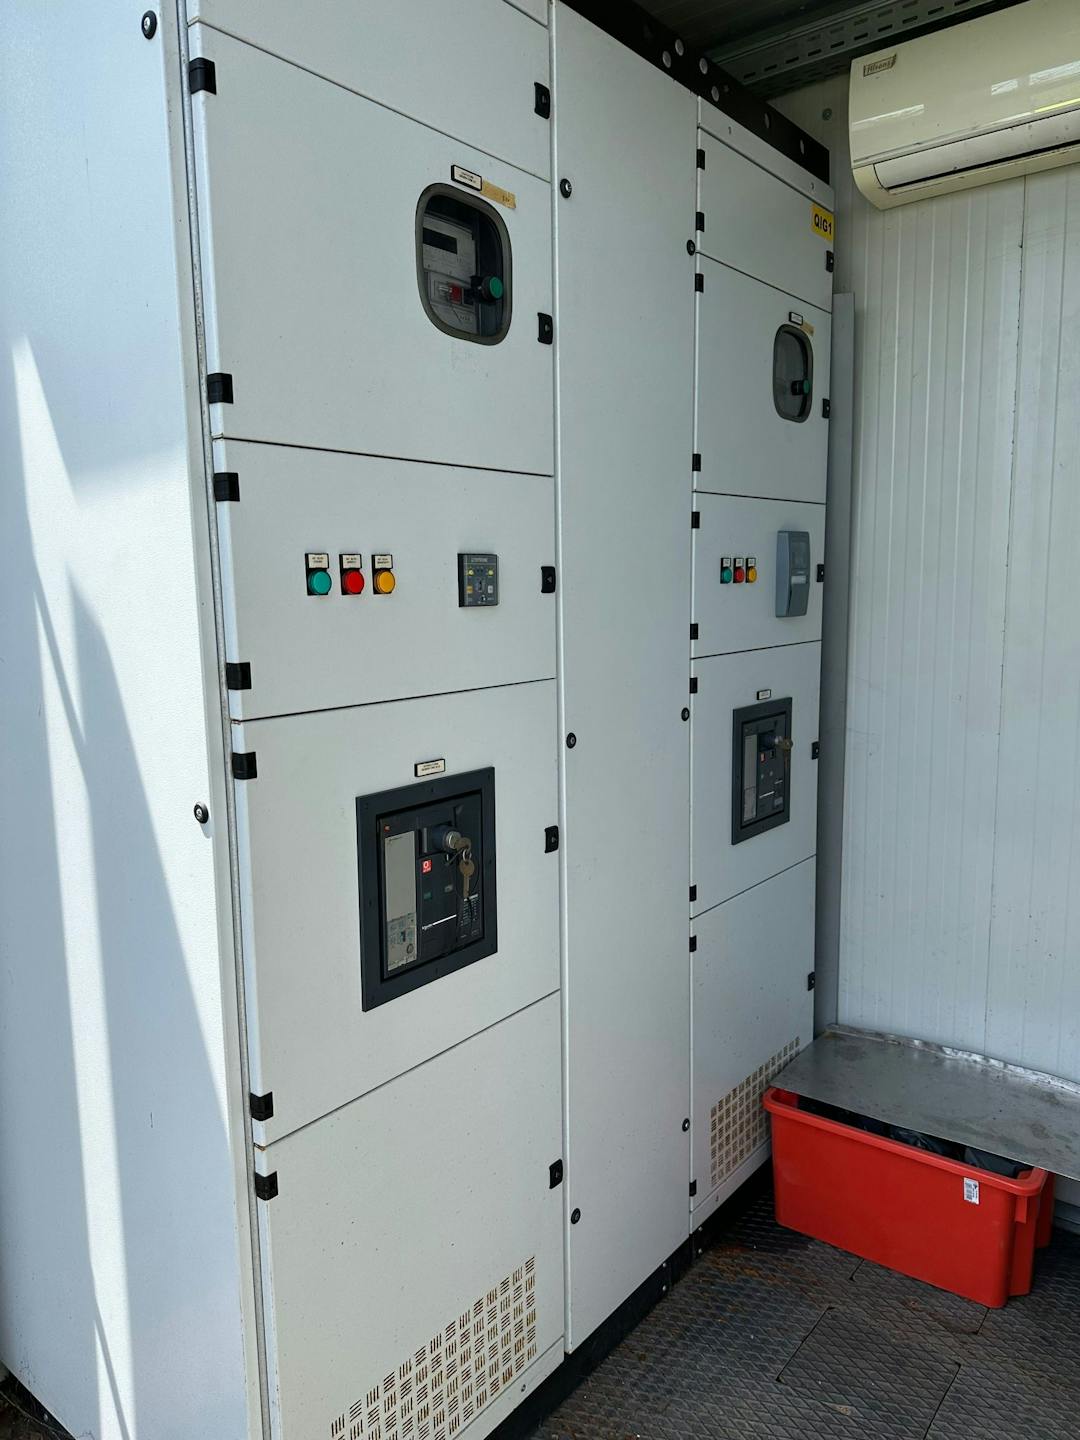 nullPhoto of Guascor FGLD180 Natural Gas Generator Set with control panel doors - second hand generator for sale uk